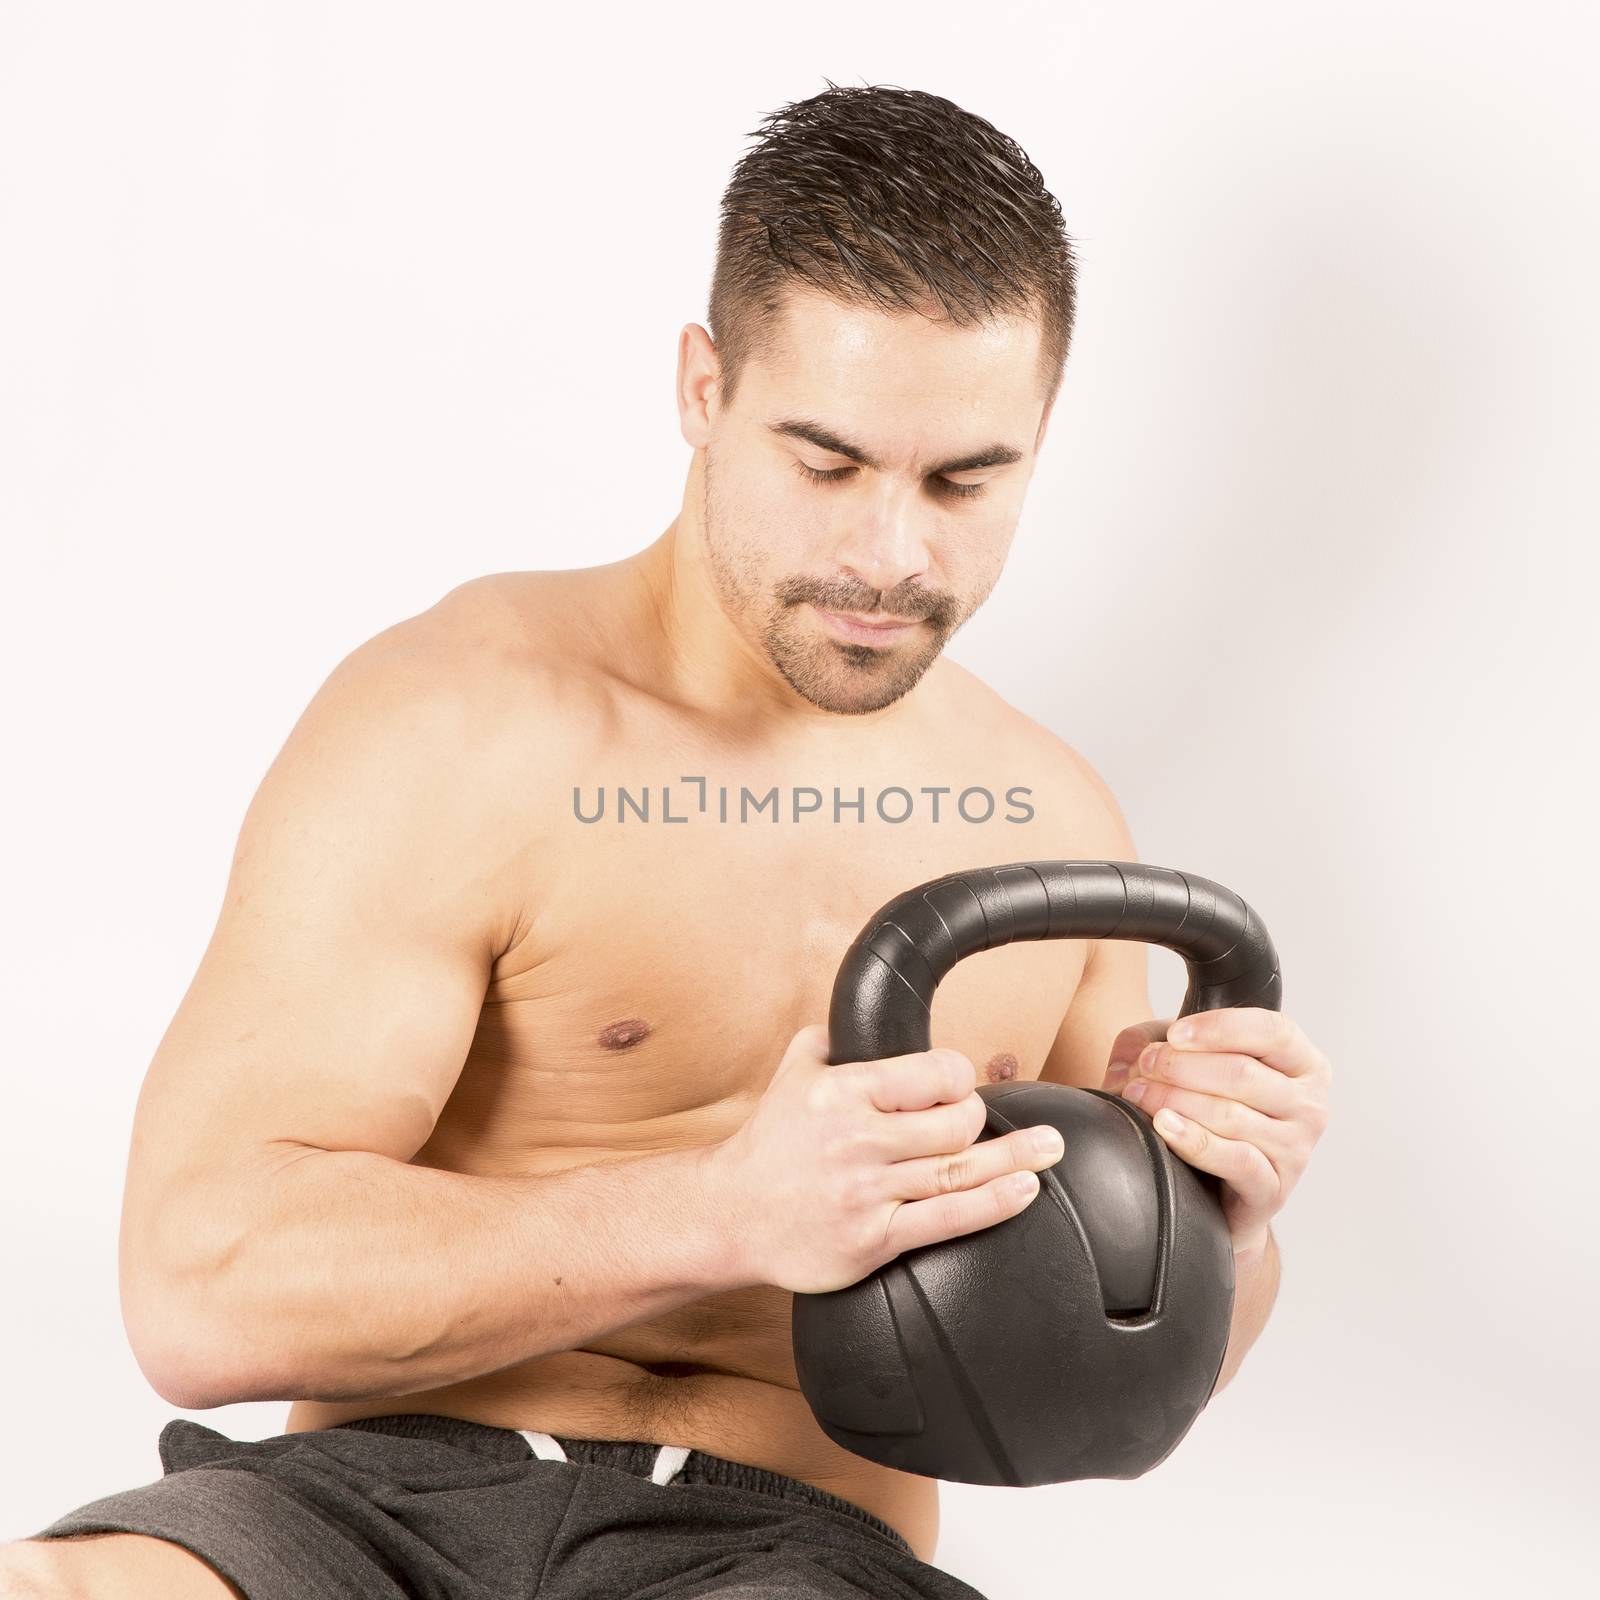 Strong model man doing push up exercises